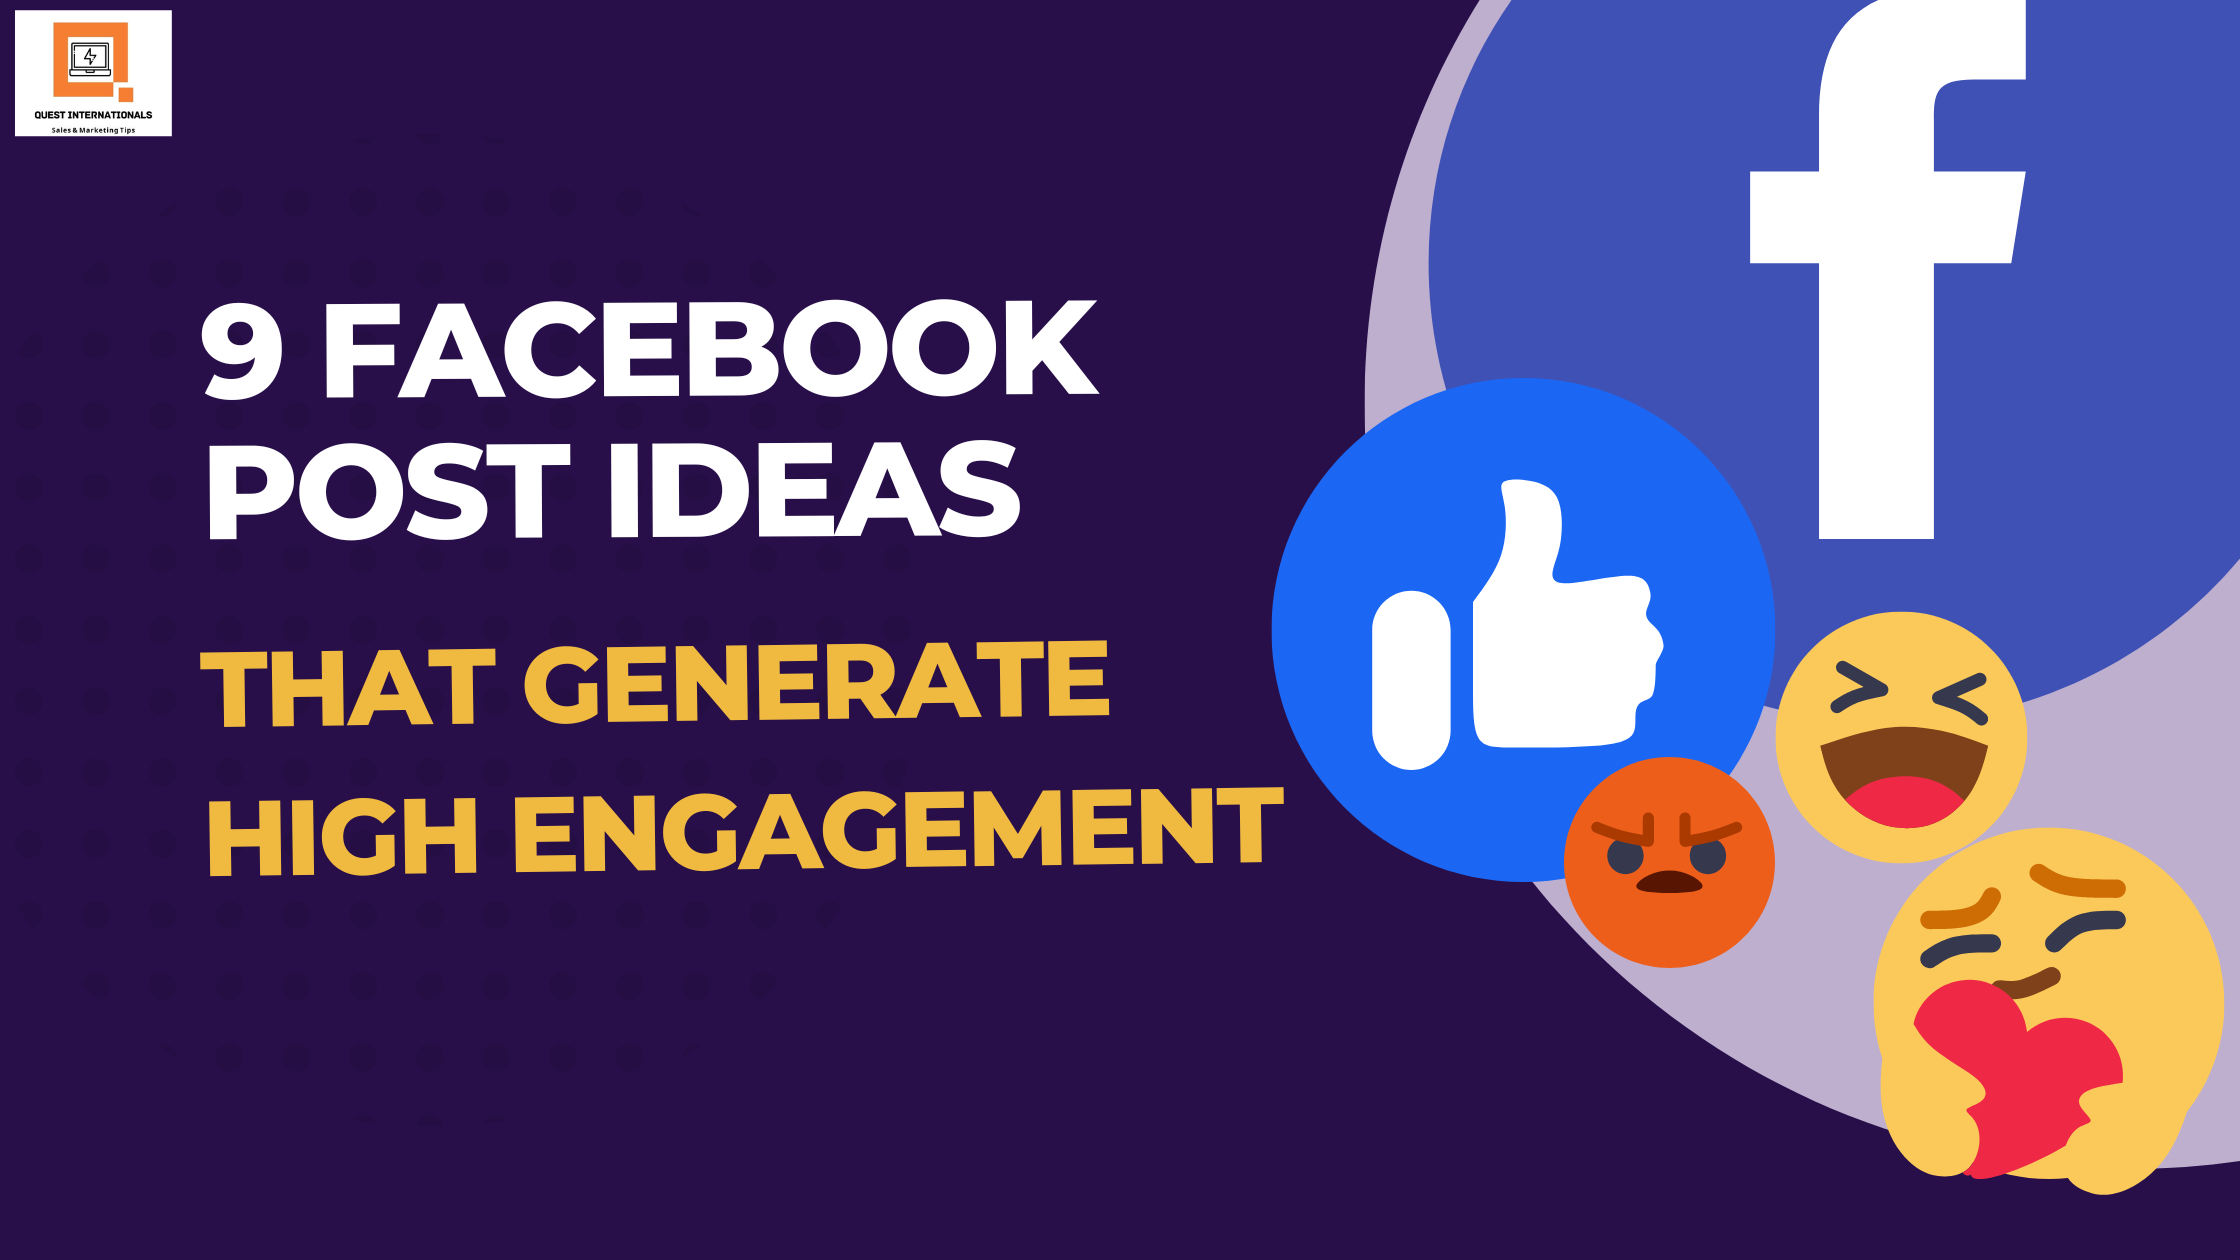 9 Facebook Post Ideas to increase Engagement